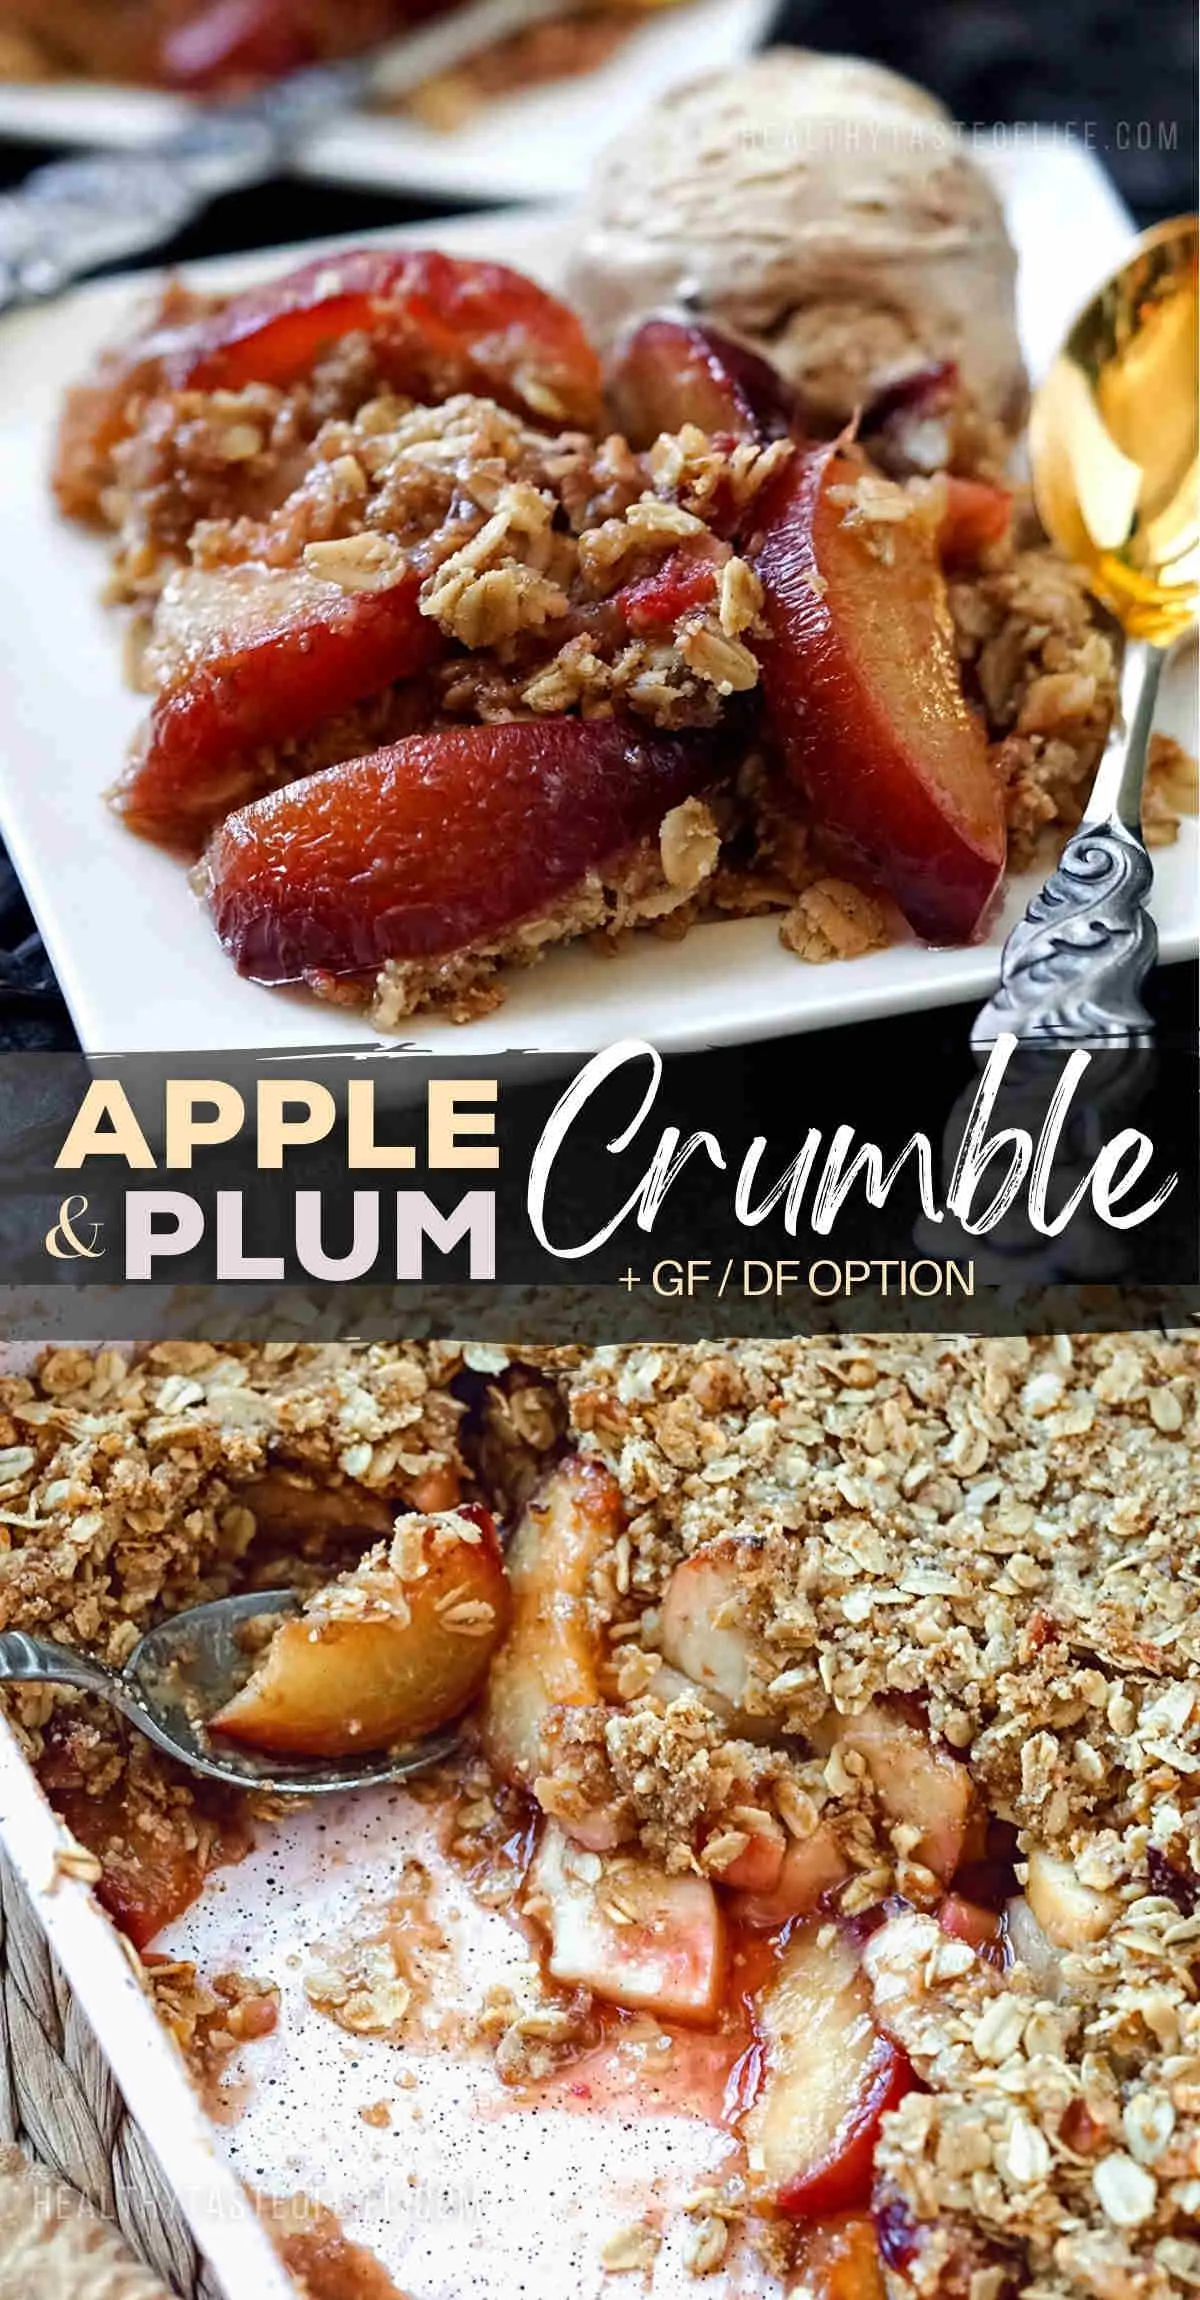 This plum and apple crumble recipe is perfectly balancing the tartness of apples with the sweetness of plums, and is topped with a crunchy crumble then baked in the oven to a golden brown perfection (aka apple and plum crisp). Whether you're looking for a gluten-free dessert or a comforting fruit treat in the fall season, this Apple and Plum Crumble is amazing. Save this easy plum and apple crumble recipe now! #ApplePlumCrumble #FallDesserts #GlutenFree #plum #apple #crisp #fruitcrumble